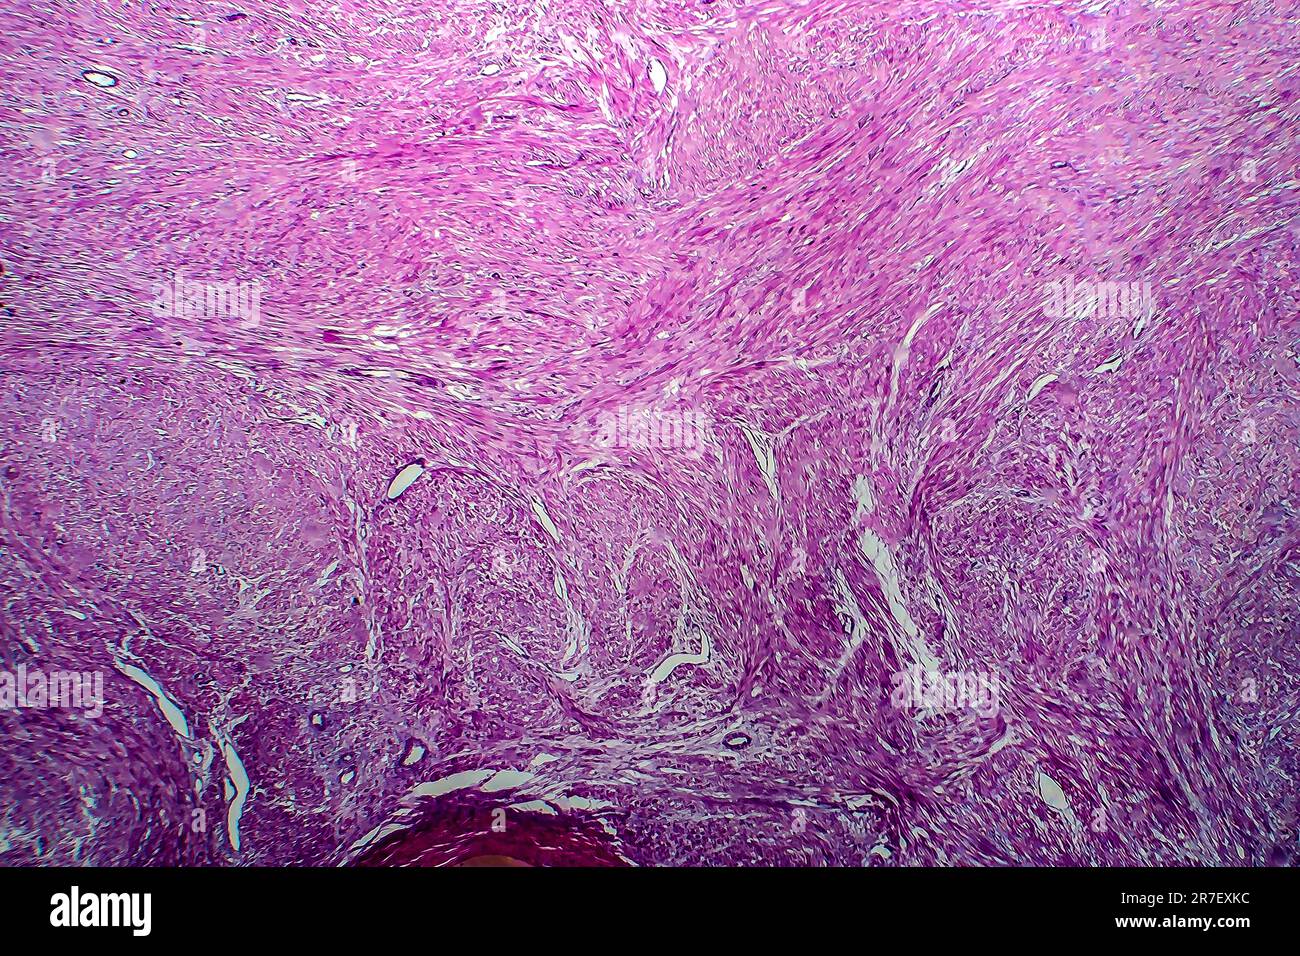 Uterine fibroid. Light micrograph (LM) of a section through tissue from the uterus, in a case of a uterine fibroids (leiomyoma). A fibroid is a benign Stock Photo